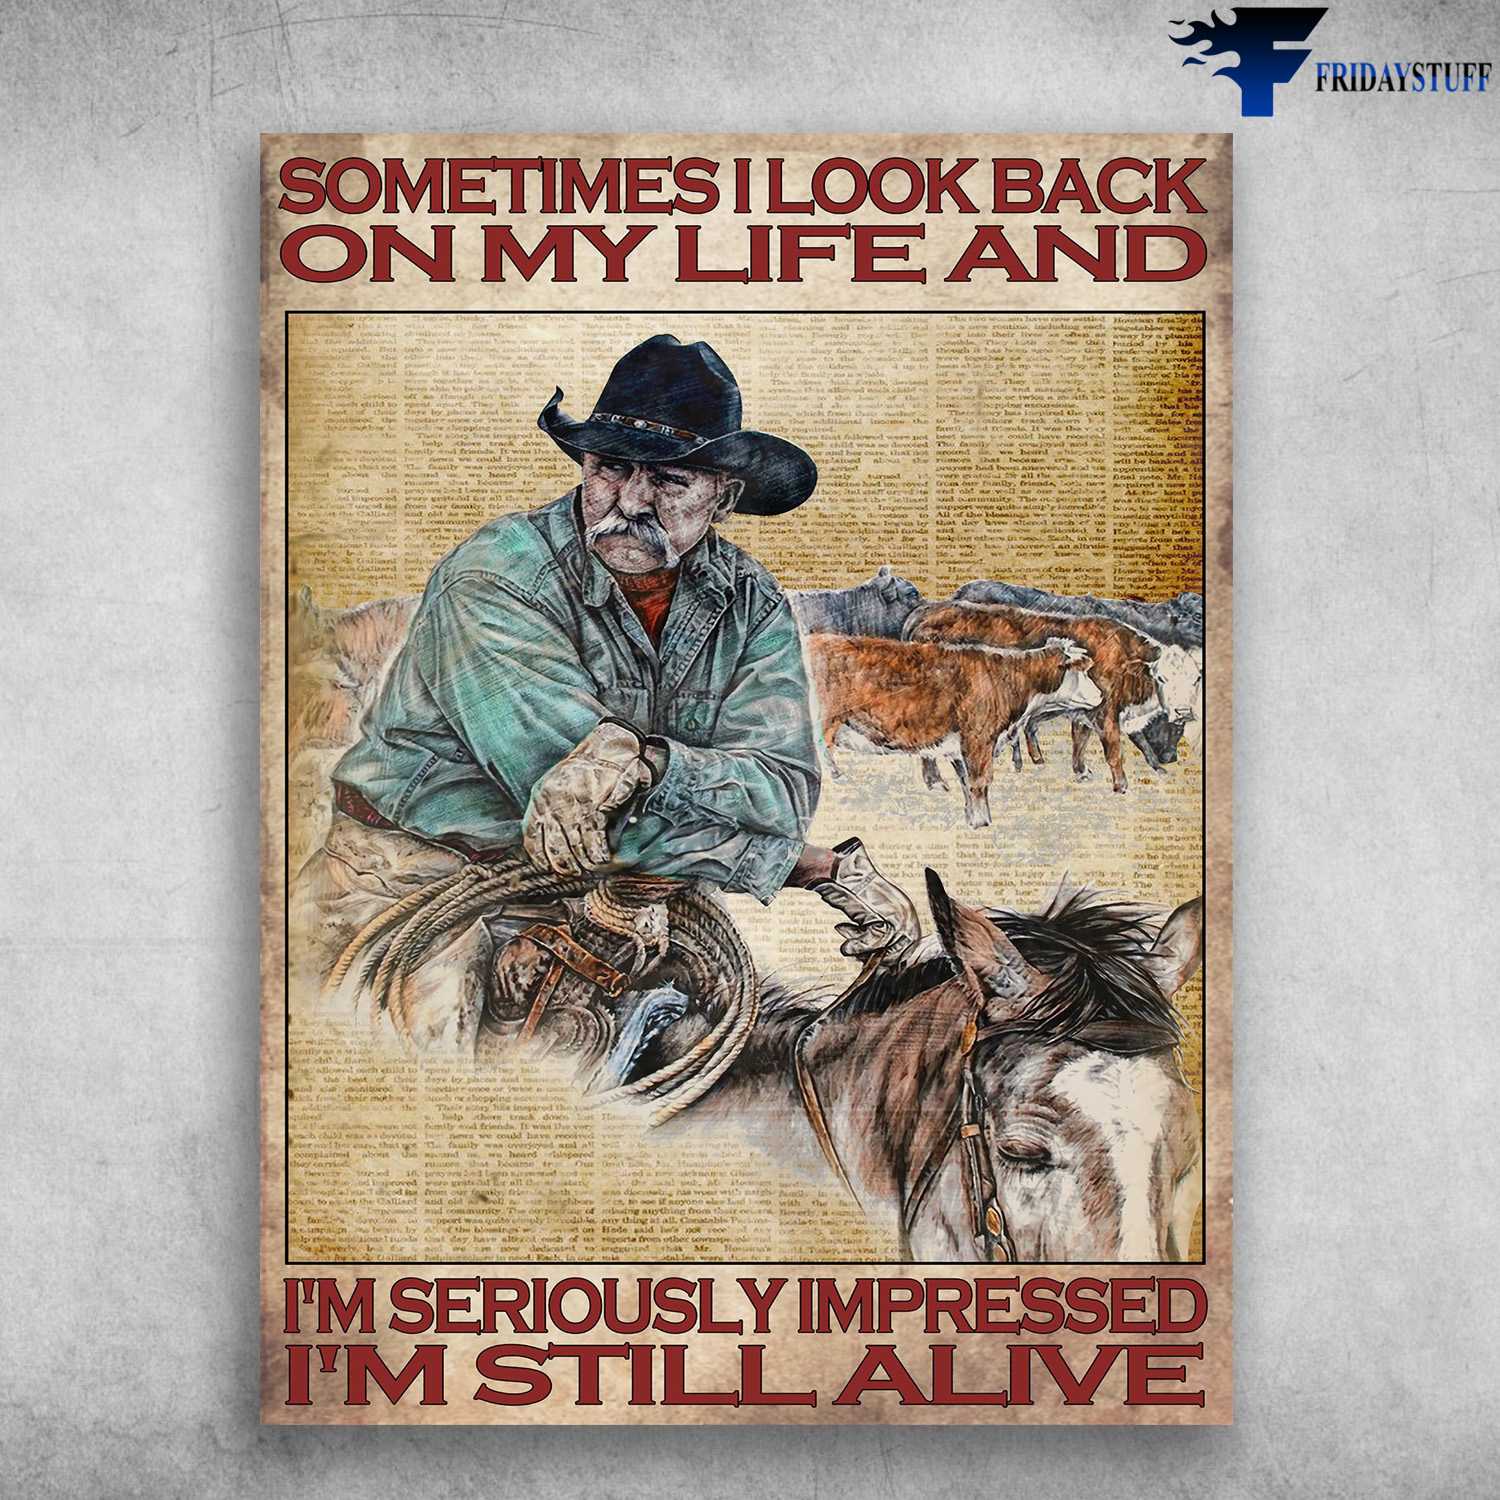 Old Cowboy, Horse Riding - Sometimes I Look Back On My Life, And I'm Seriously Impressed, I'm Still Alive